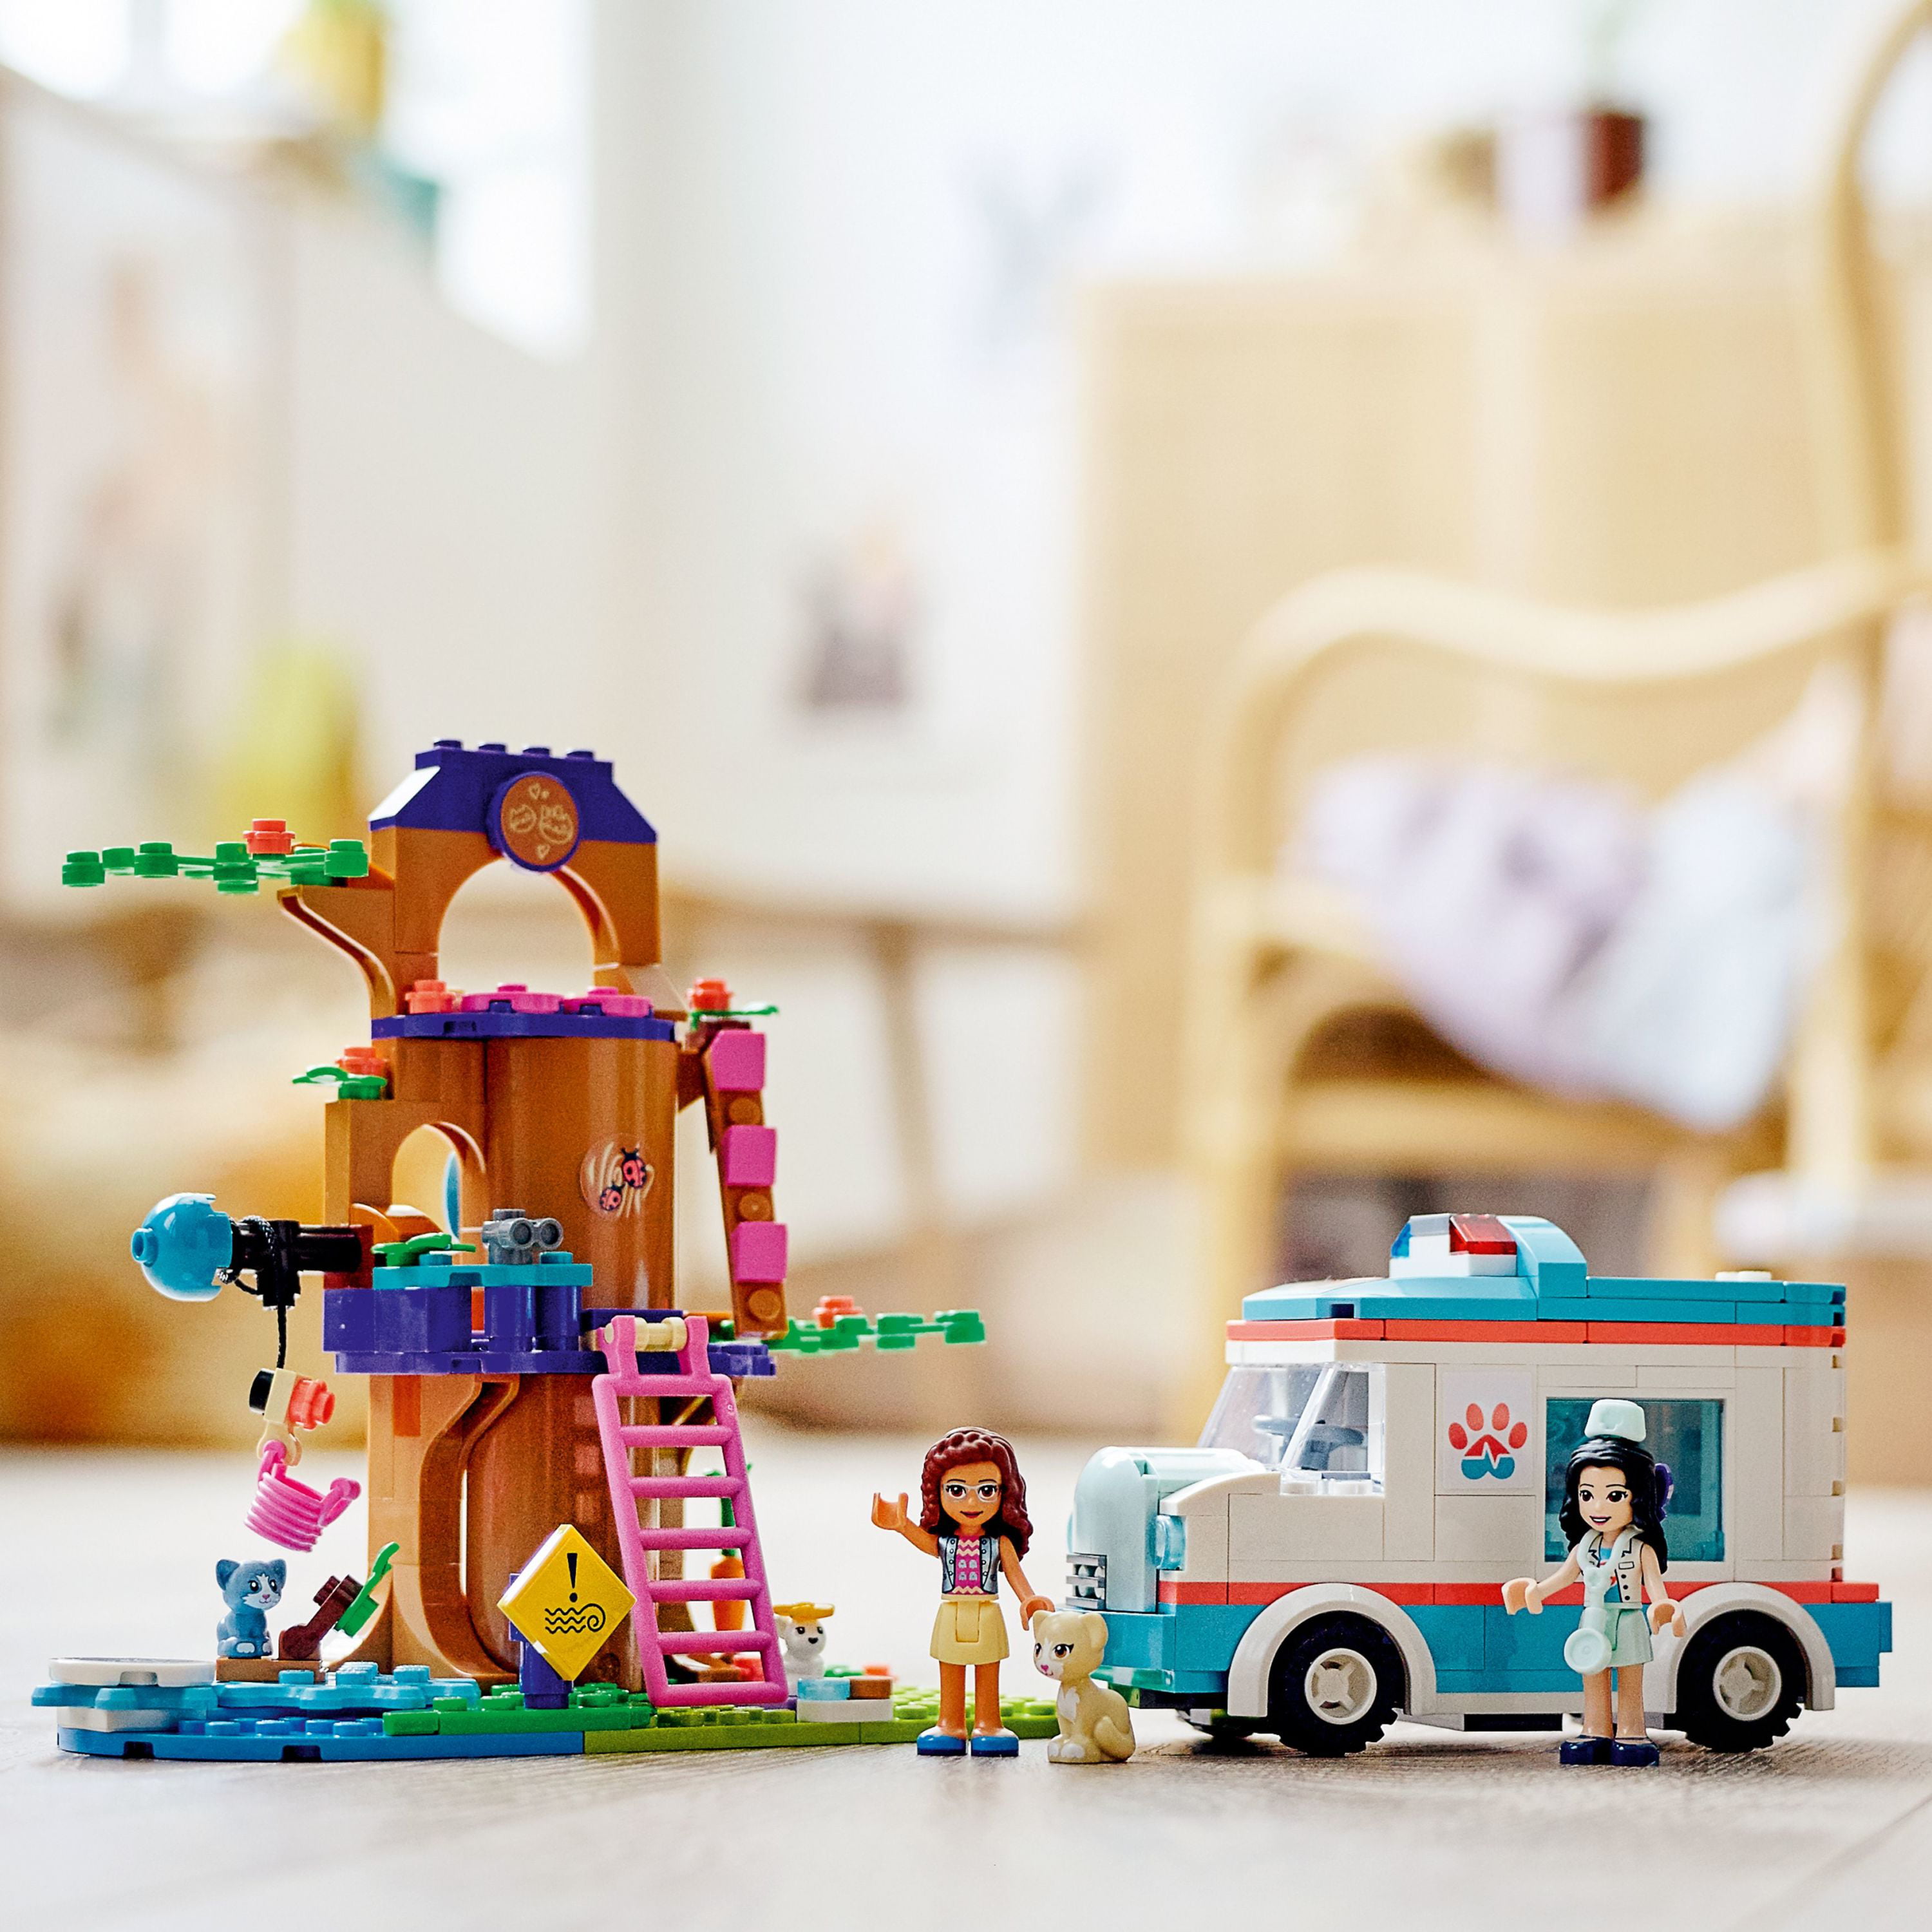 LEGO Friends Vet Clinic Ambulance 41445 Building Toy for Kids Who 